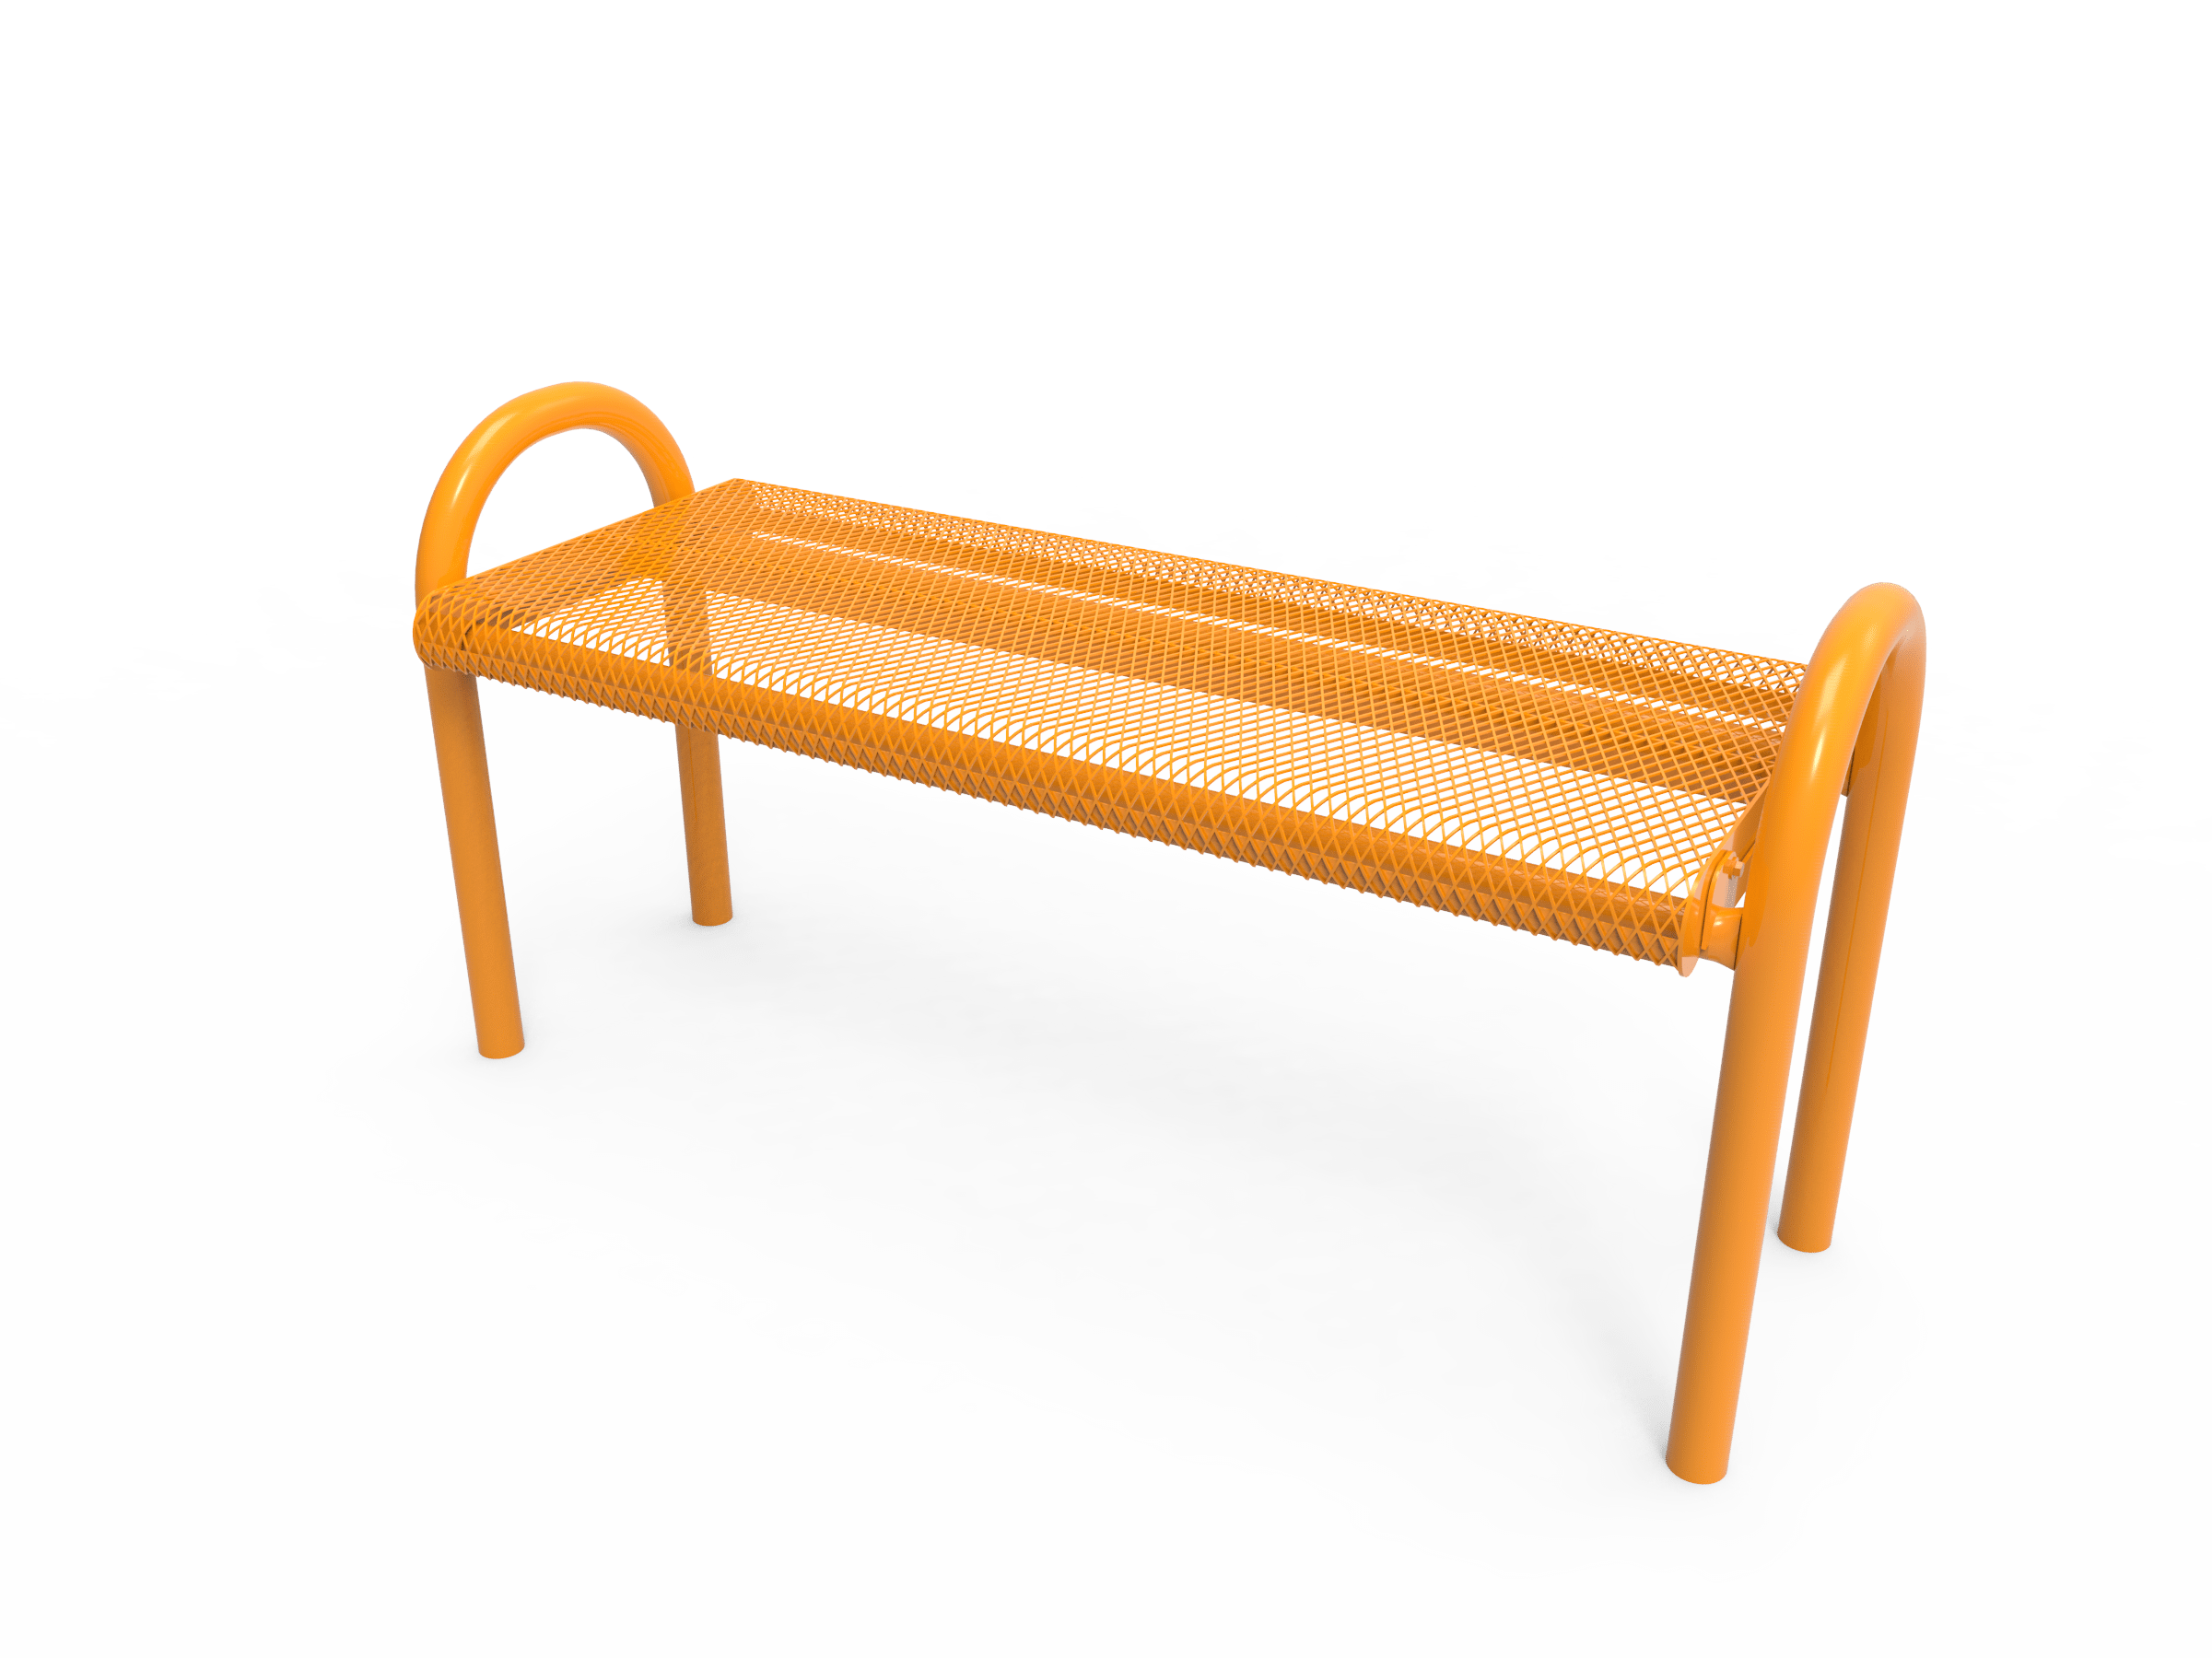 4′ Bench Without Back In Ground-Mesh
BMD04-C-59-000
Industry Standard Finish
$789.00
BMD04-A-59-000
Advantage Premium Finish
$979.00
